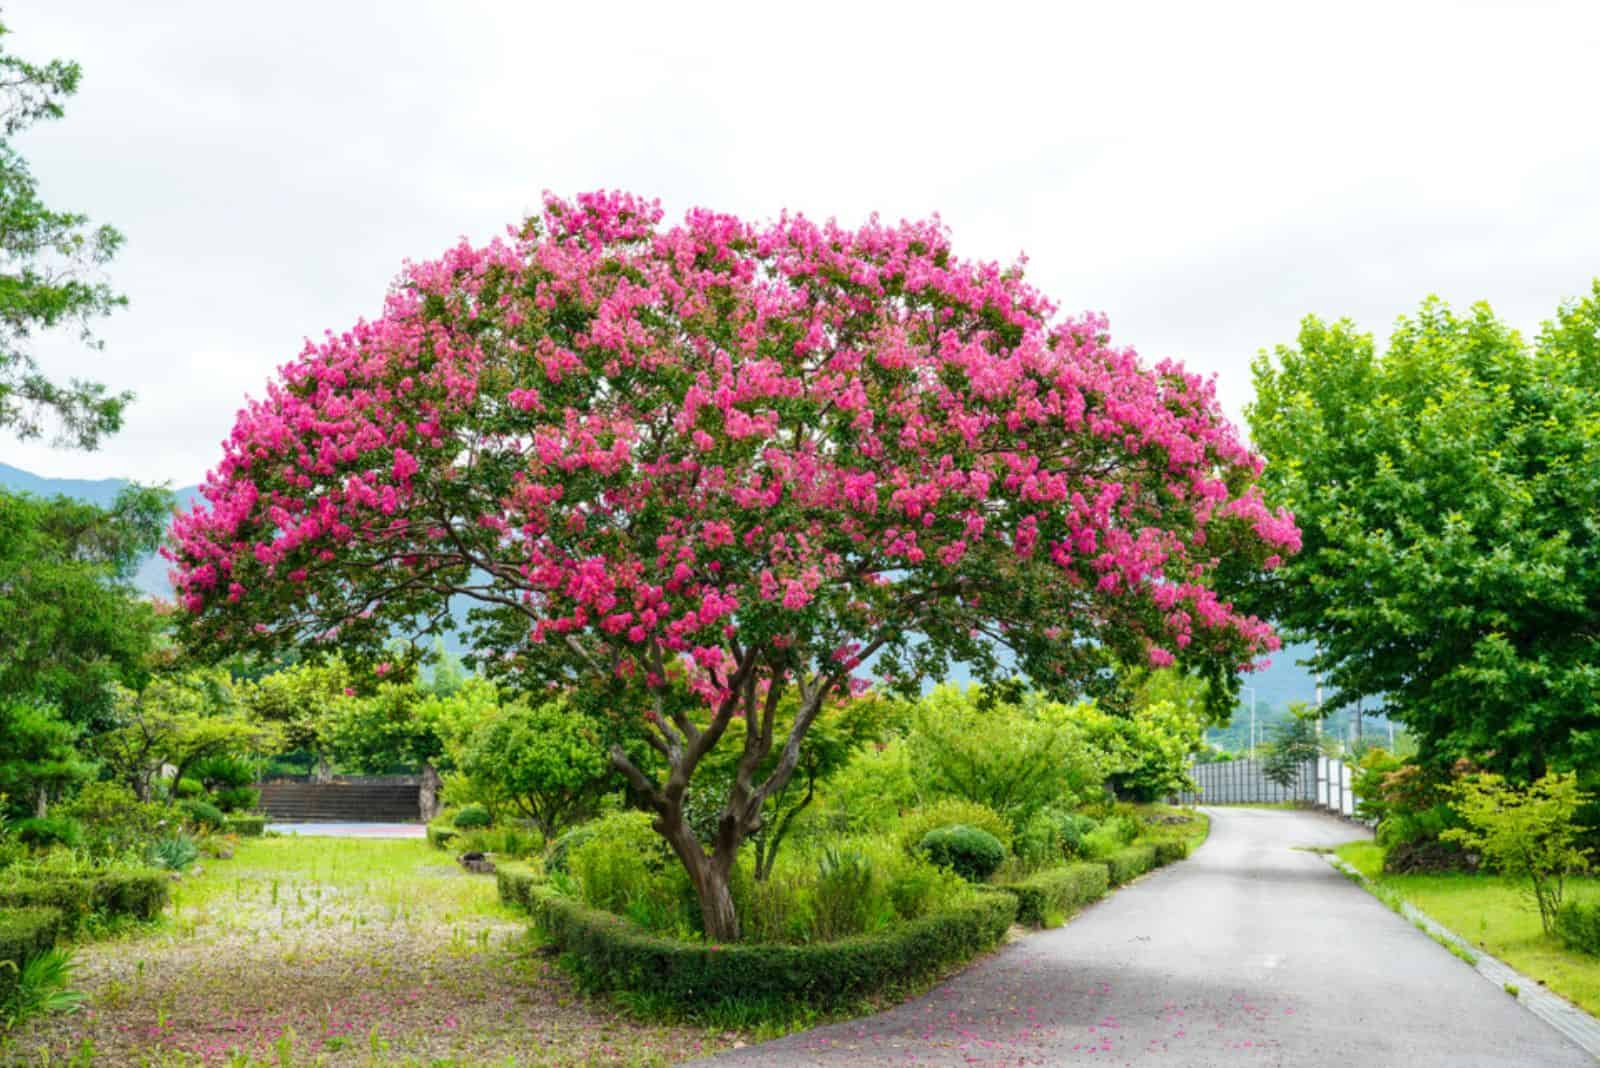 How To Transplant Crepe Myrtle In 8 Easy Steps